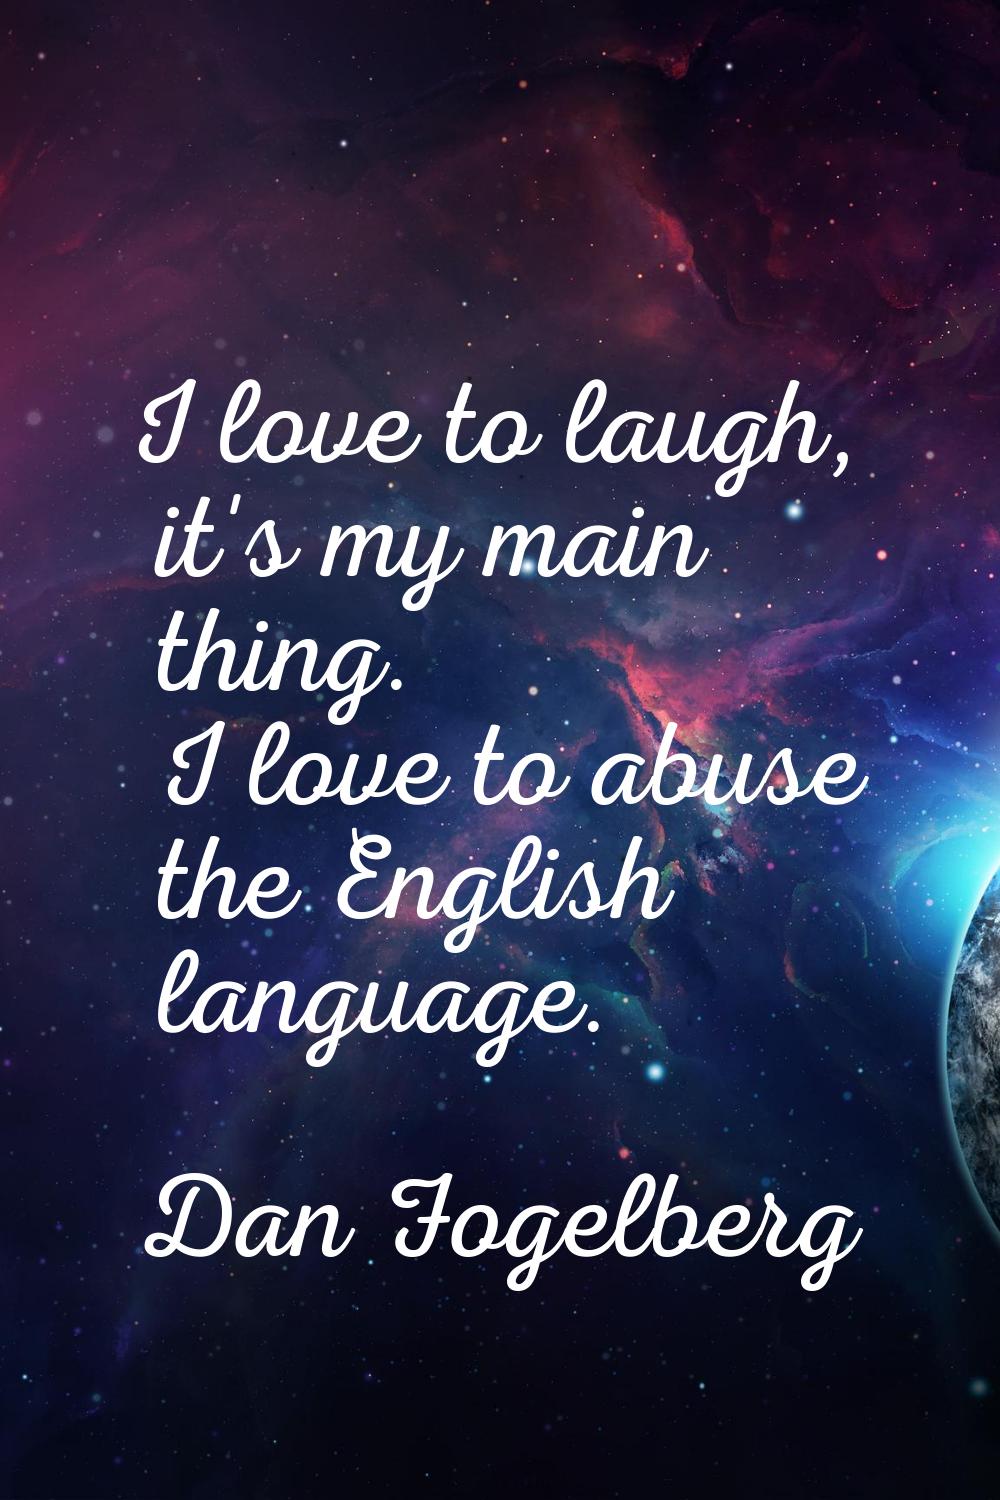 I love to laugh, it's my main thing. I love to abuse the English language.